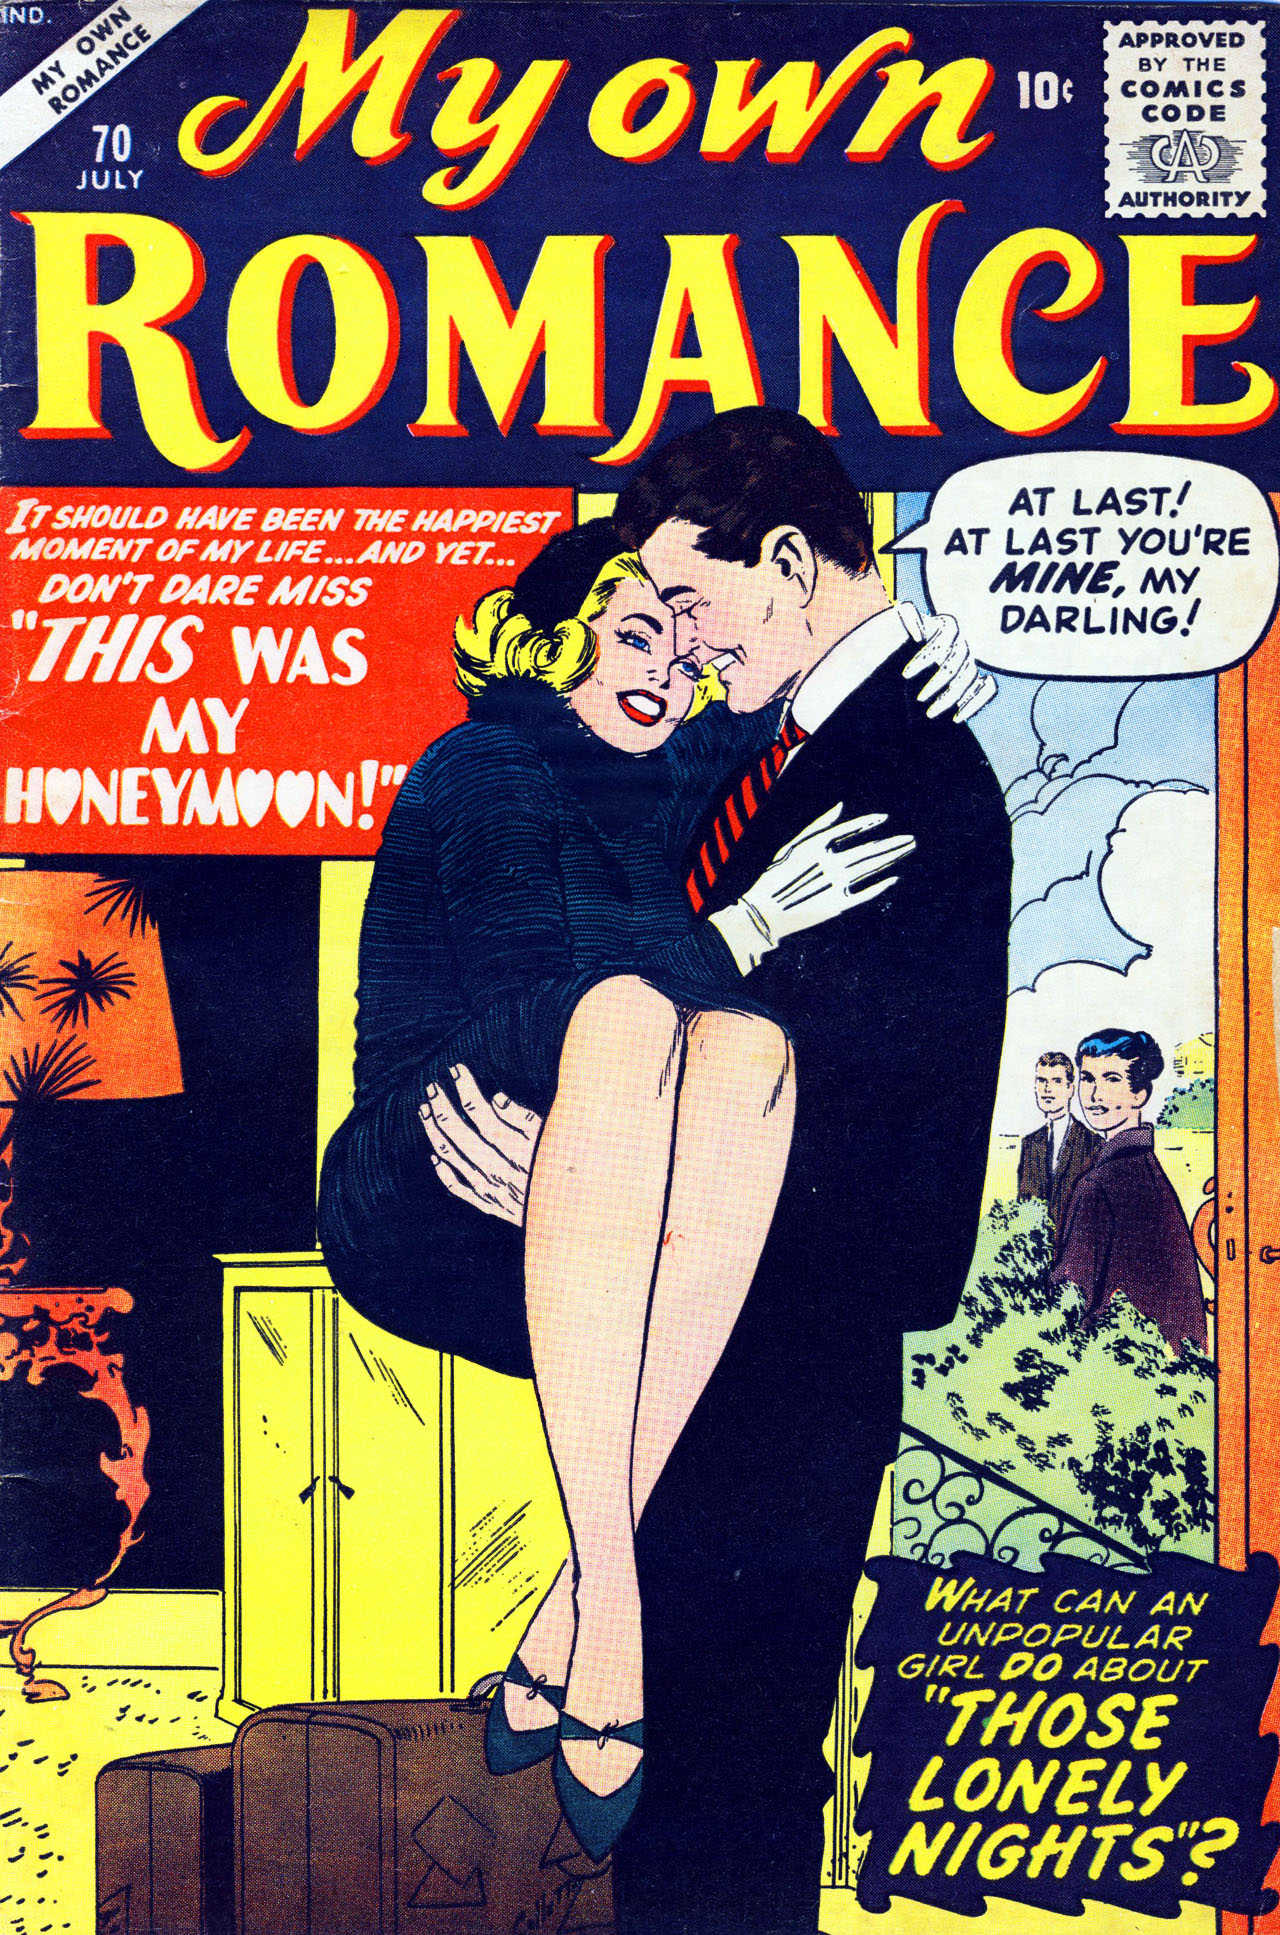 Read online My Own Romance comic -  Issue #70 - 1